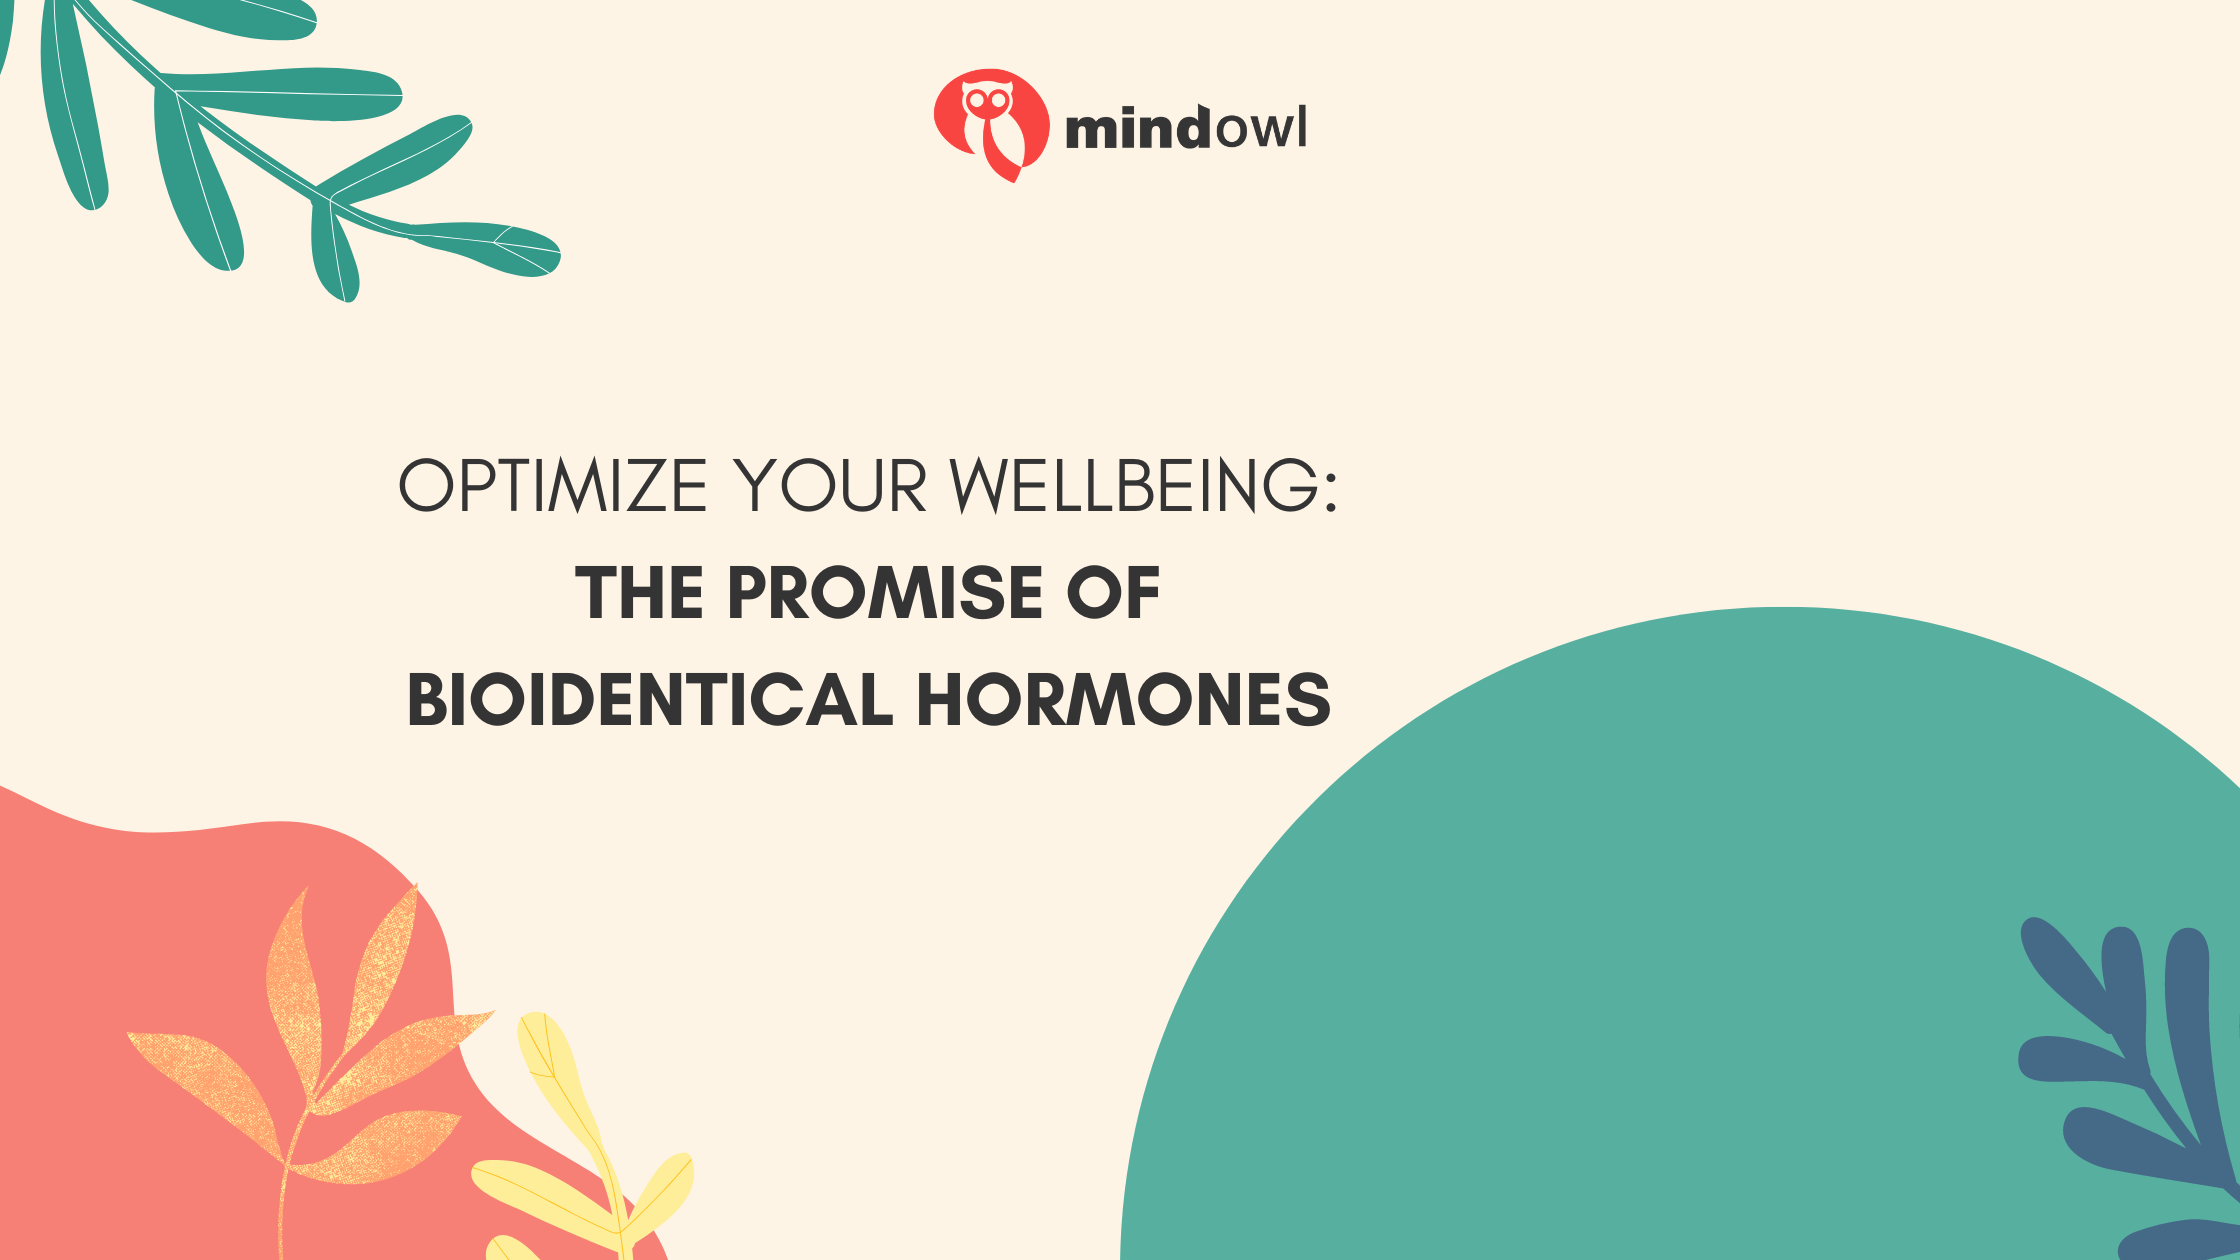 Optimize Your Wellbeing: The Promise of Bioidentical Hormones